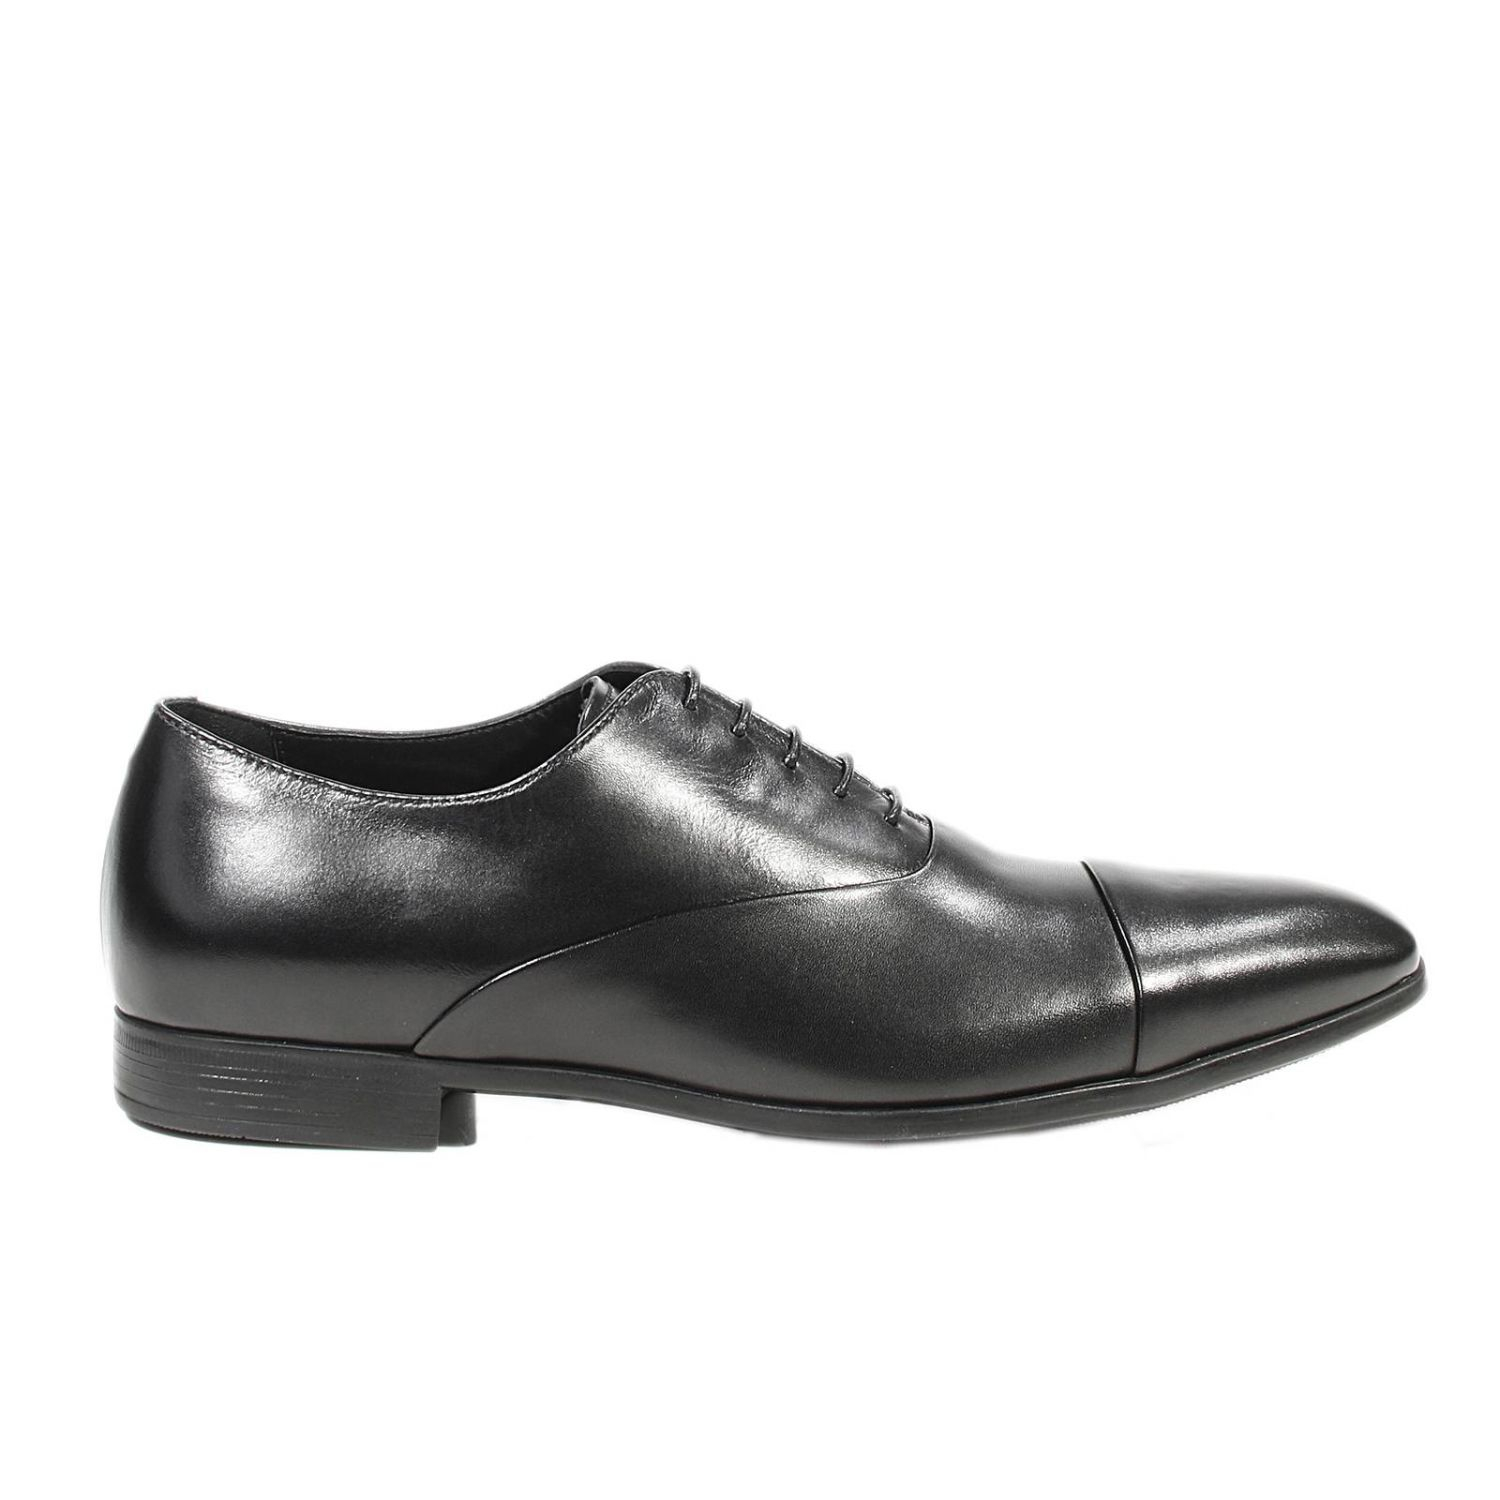 Giorgio Armani Shoes Frances Calf Leather Brushed Rubber Sole in Black ...